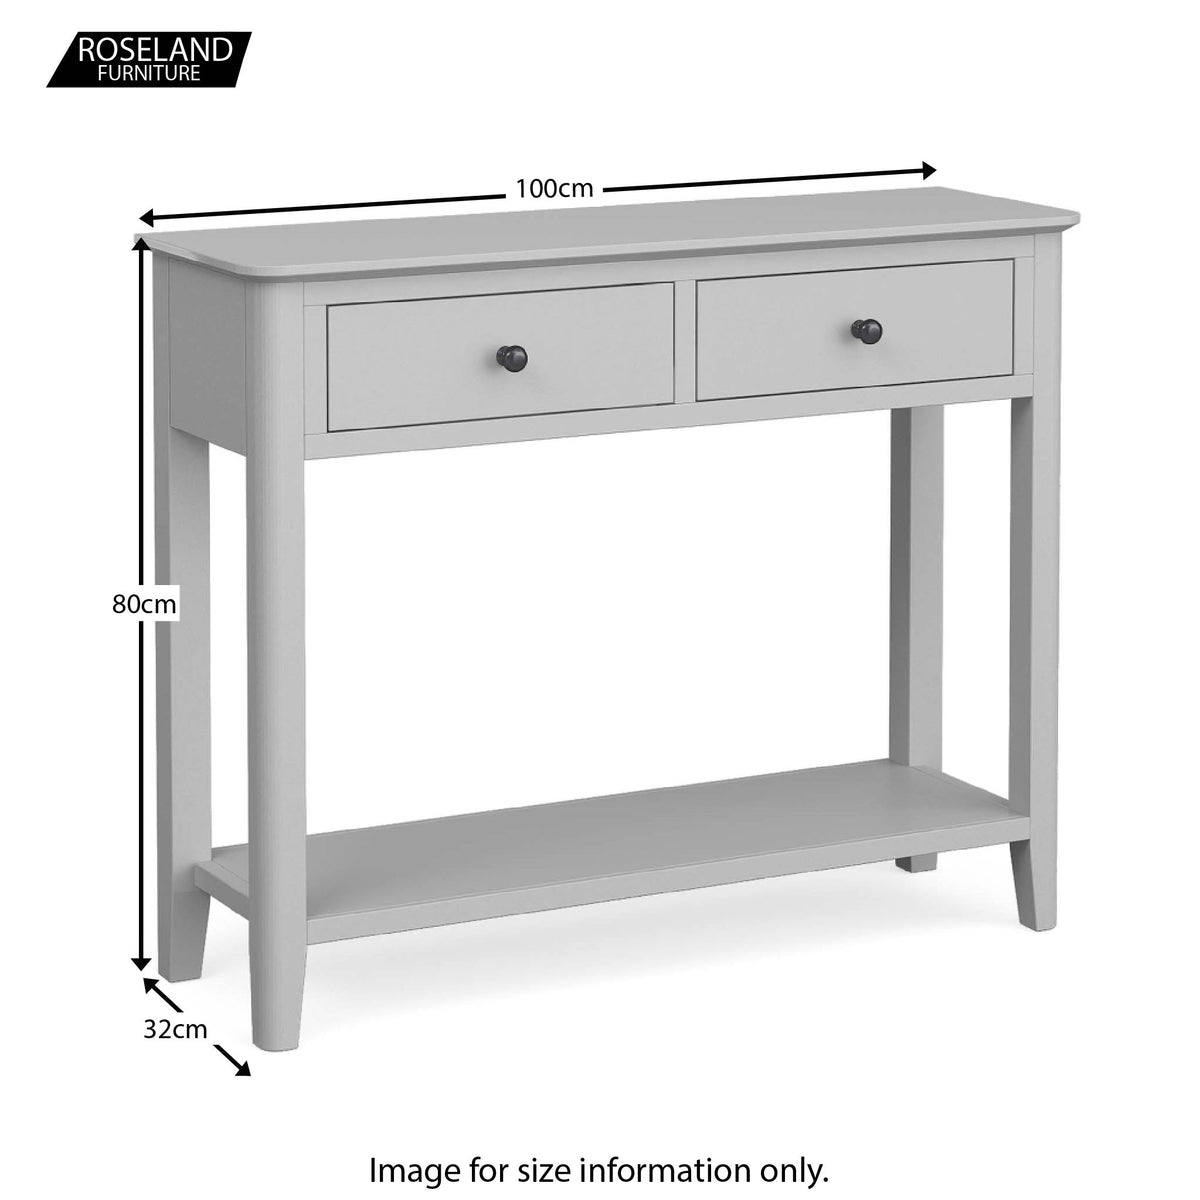 Elgin Grey Large Console Table size guide